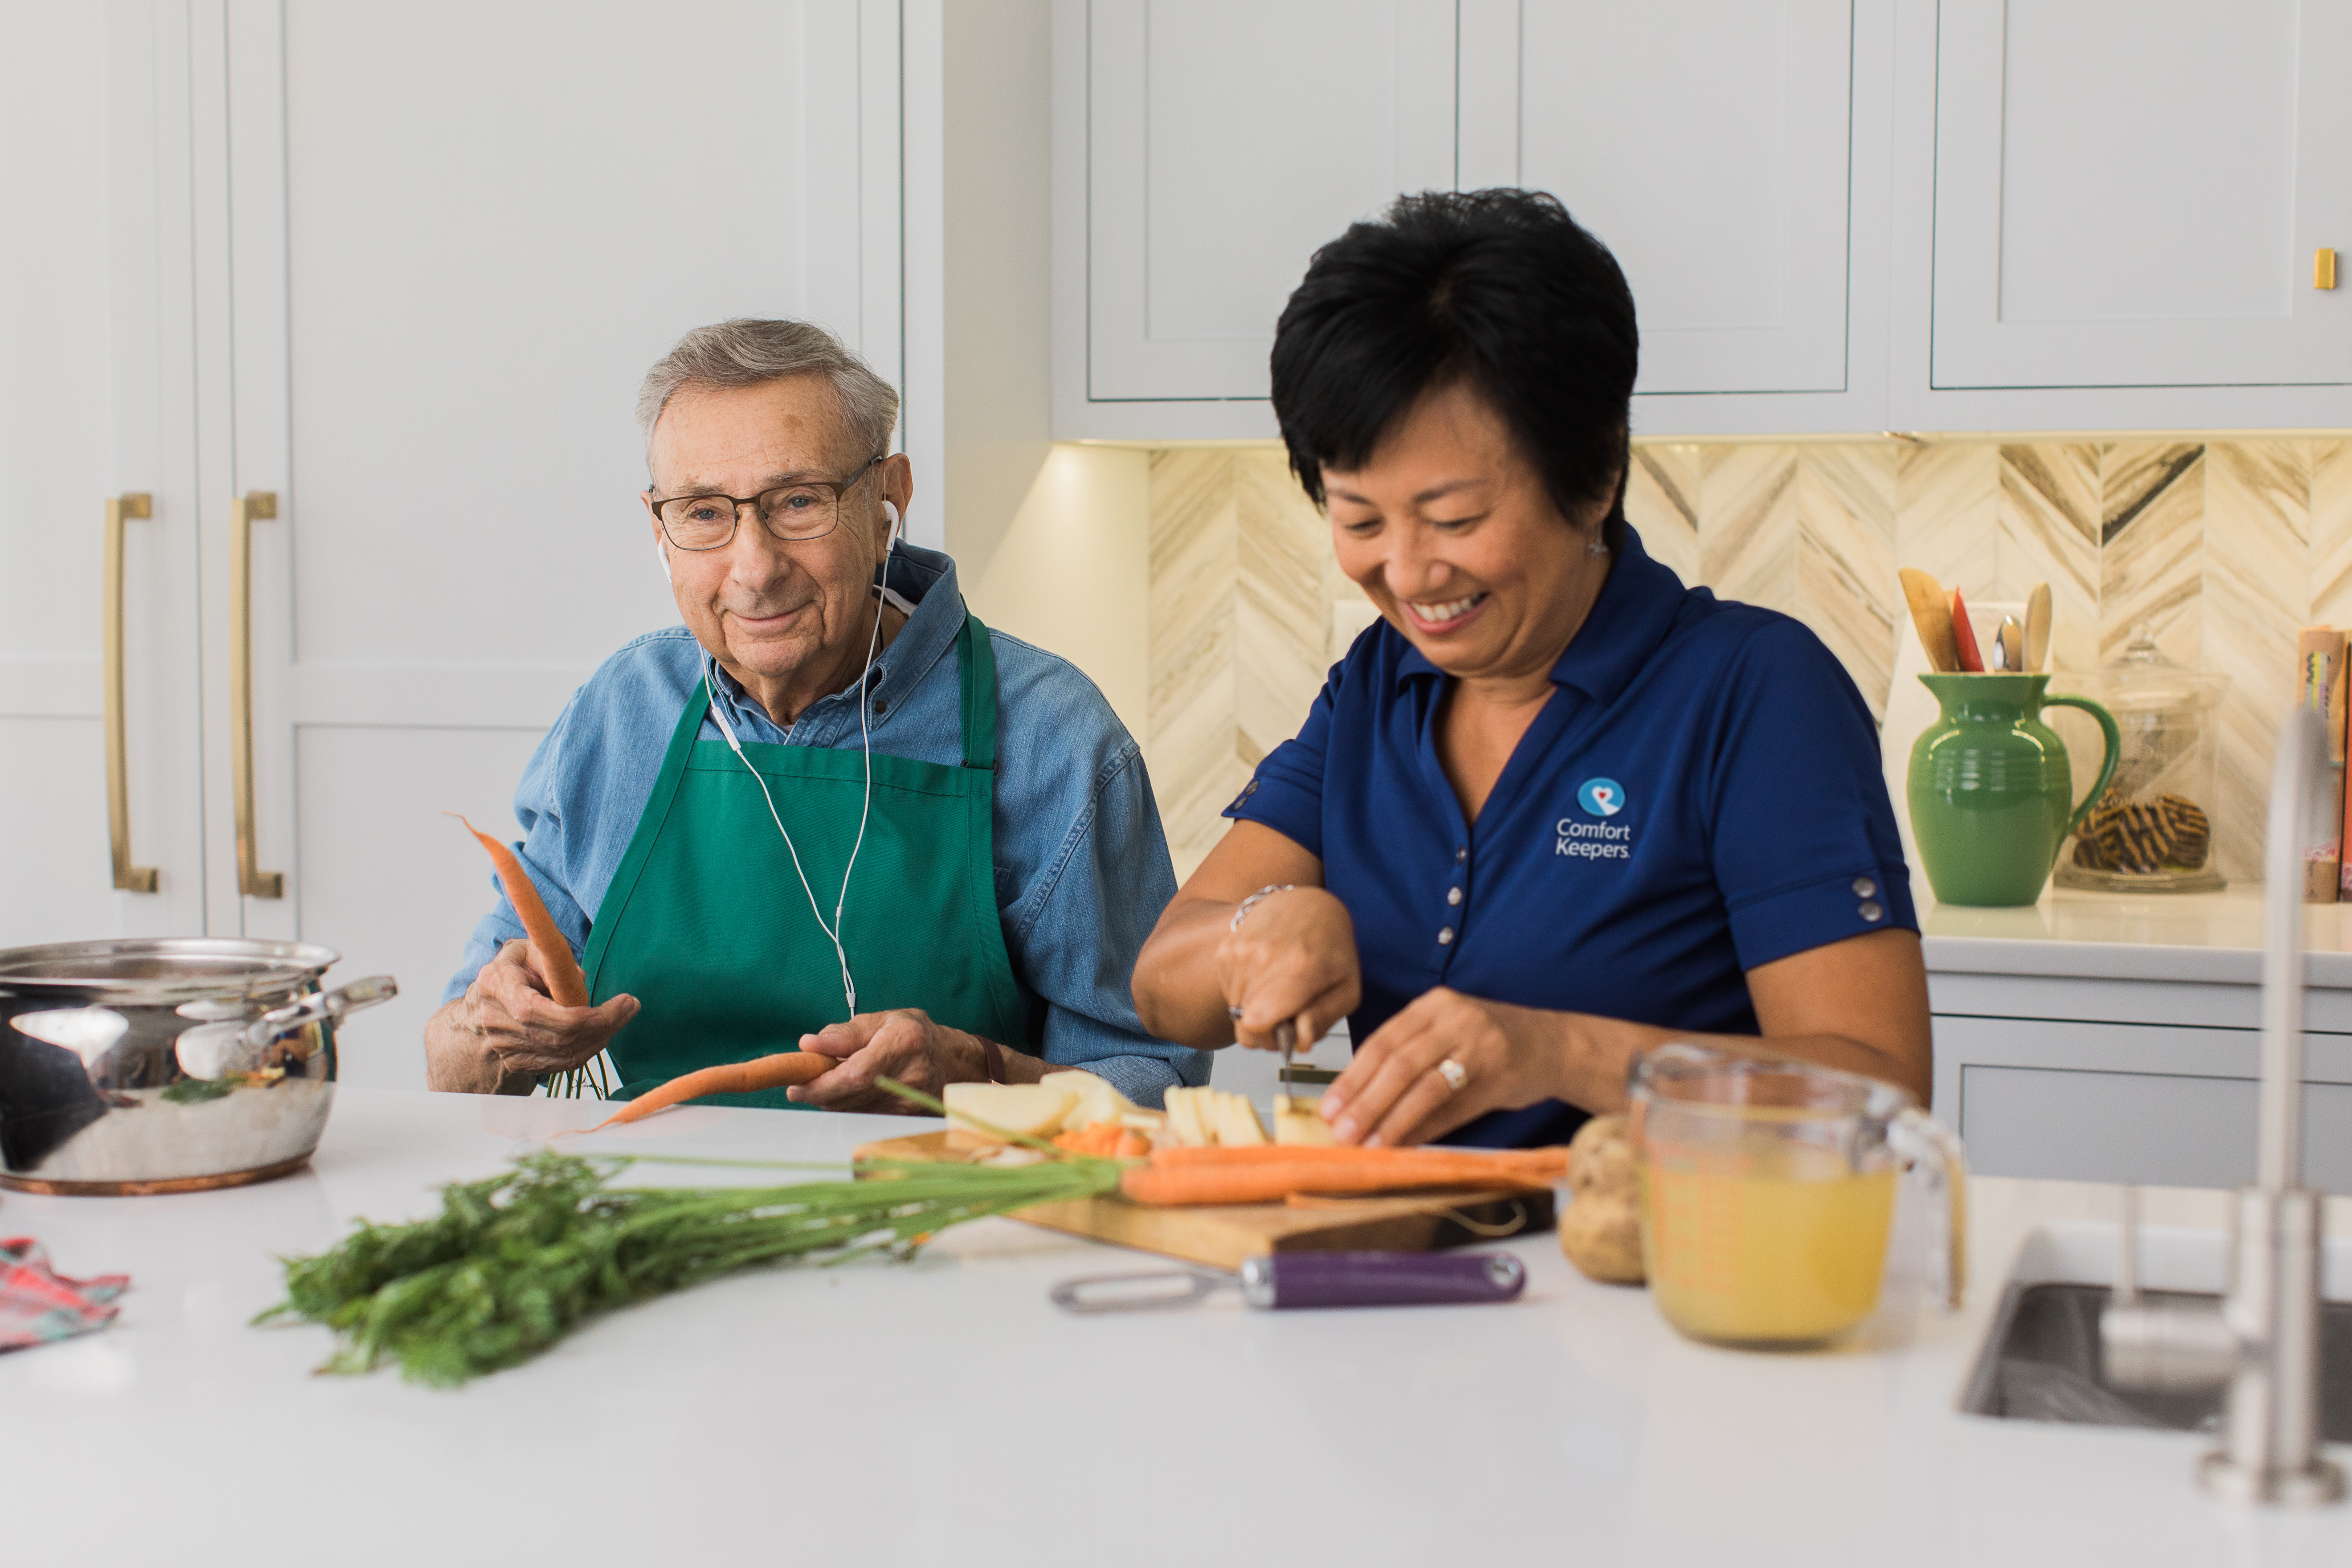 Comfort Keepers York Region South Thornhill (905)784-4187